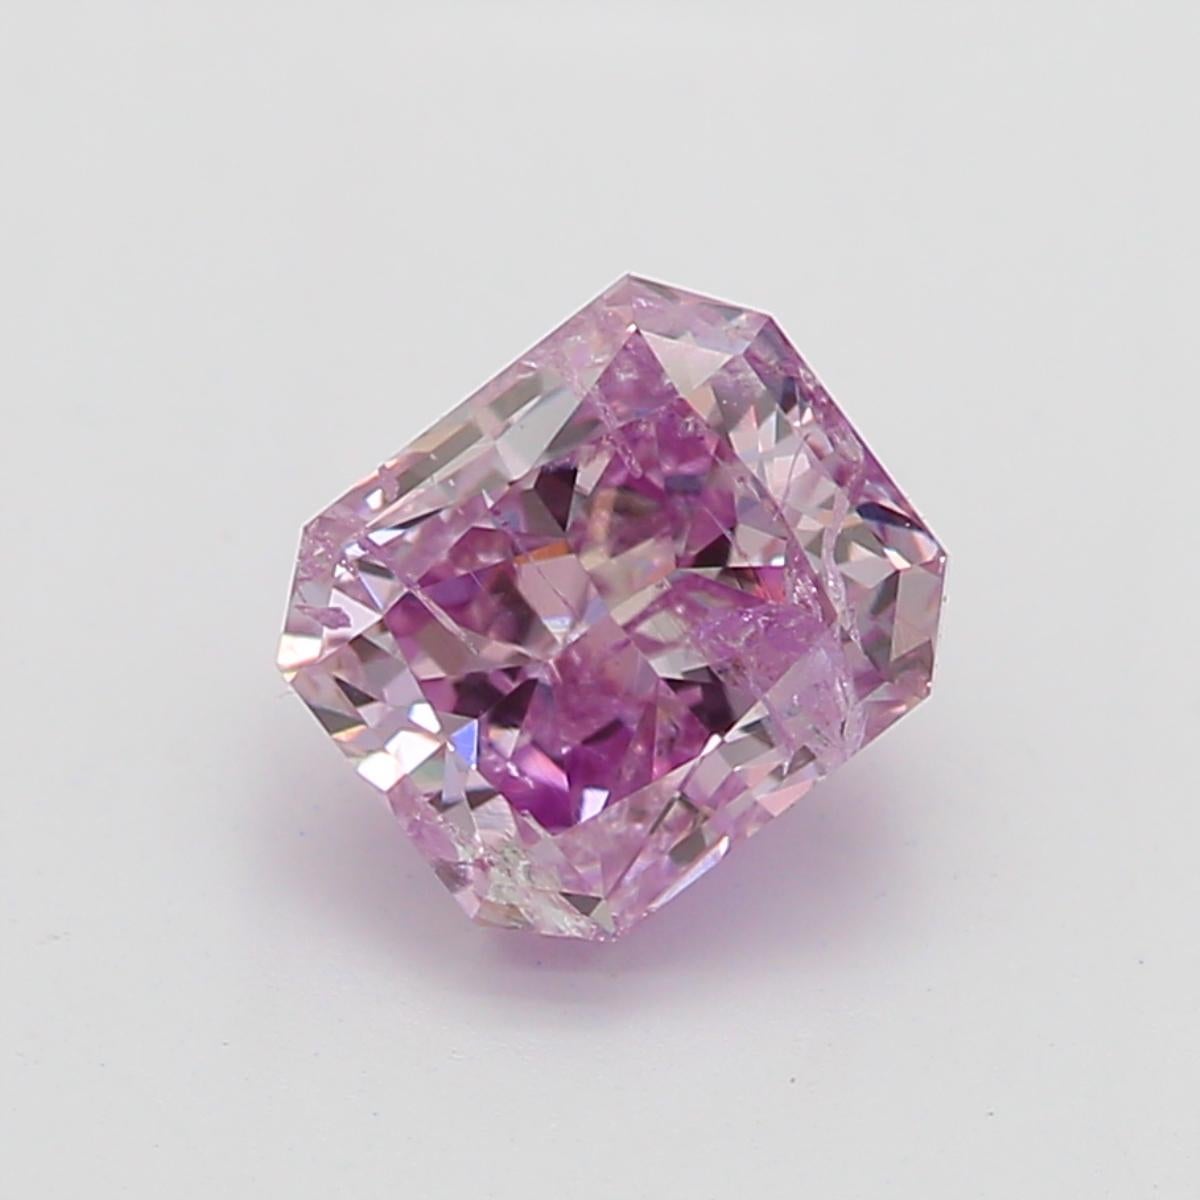 *100% NATURAL FANCY COLOUR DIAMOND*

✪ Diamond Details ✪

➛ Shape: Radiant
➛ Colour Grade: Fancy Purple Pink
➛ Carat: 0.57
➛ Clarity: I2
➛ GIA Certified 

^FEATURES OF THE DIAMOND^

This radiant-cut diamond is a rectangular or square-shaped diamond